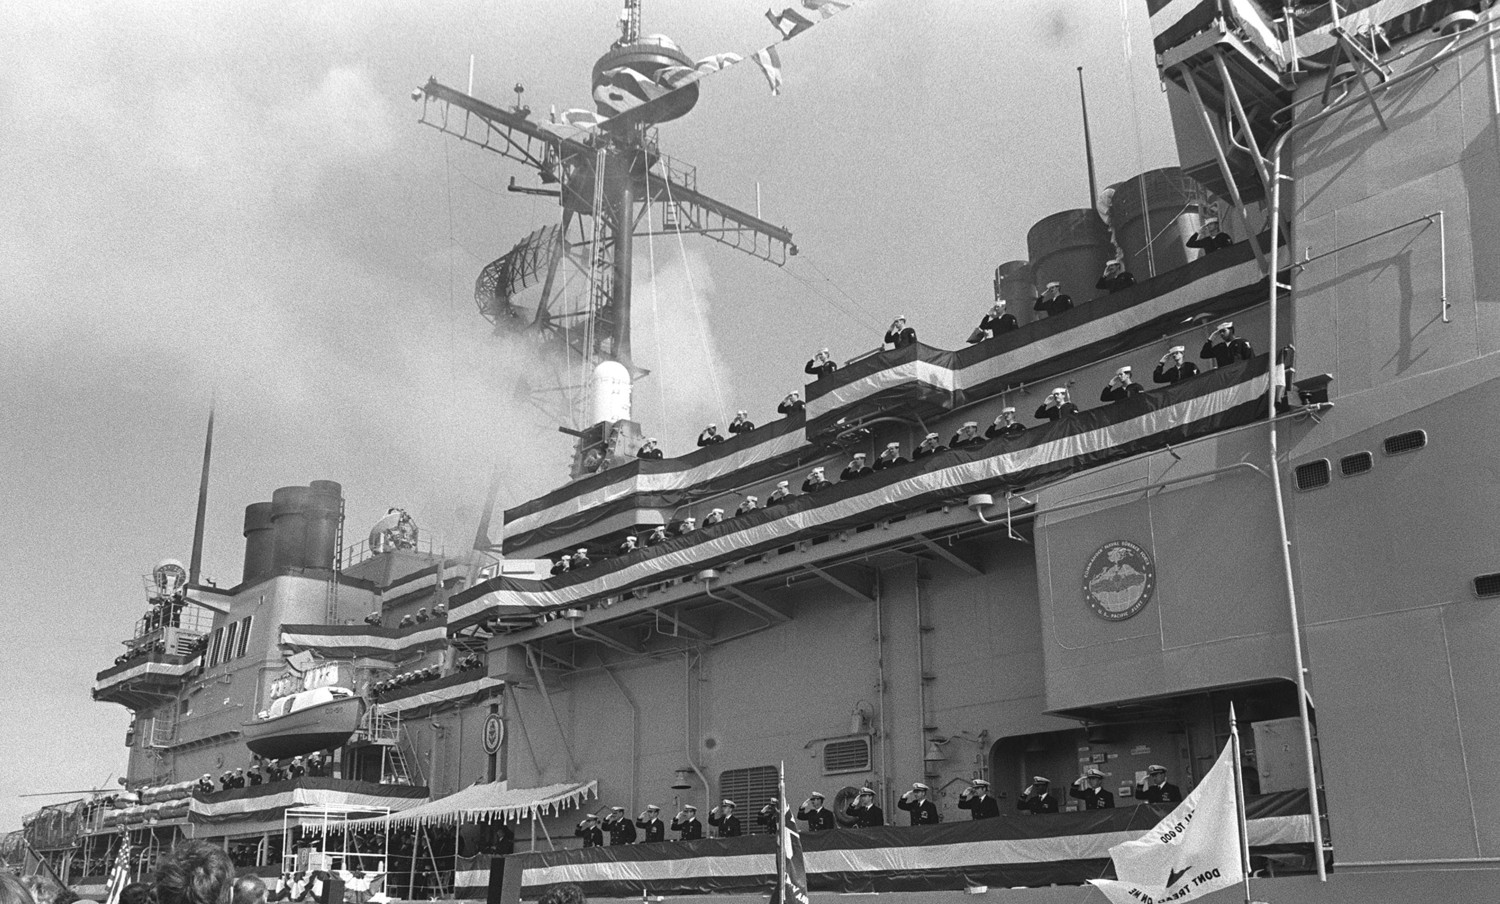 cg-50 uss valley forge ticonderoga class guided missile cruiser aegis us navy commissioning 1986